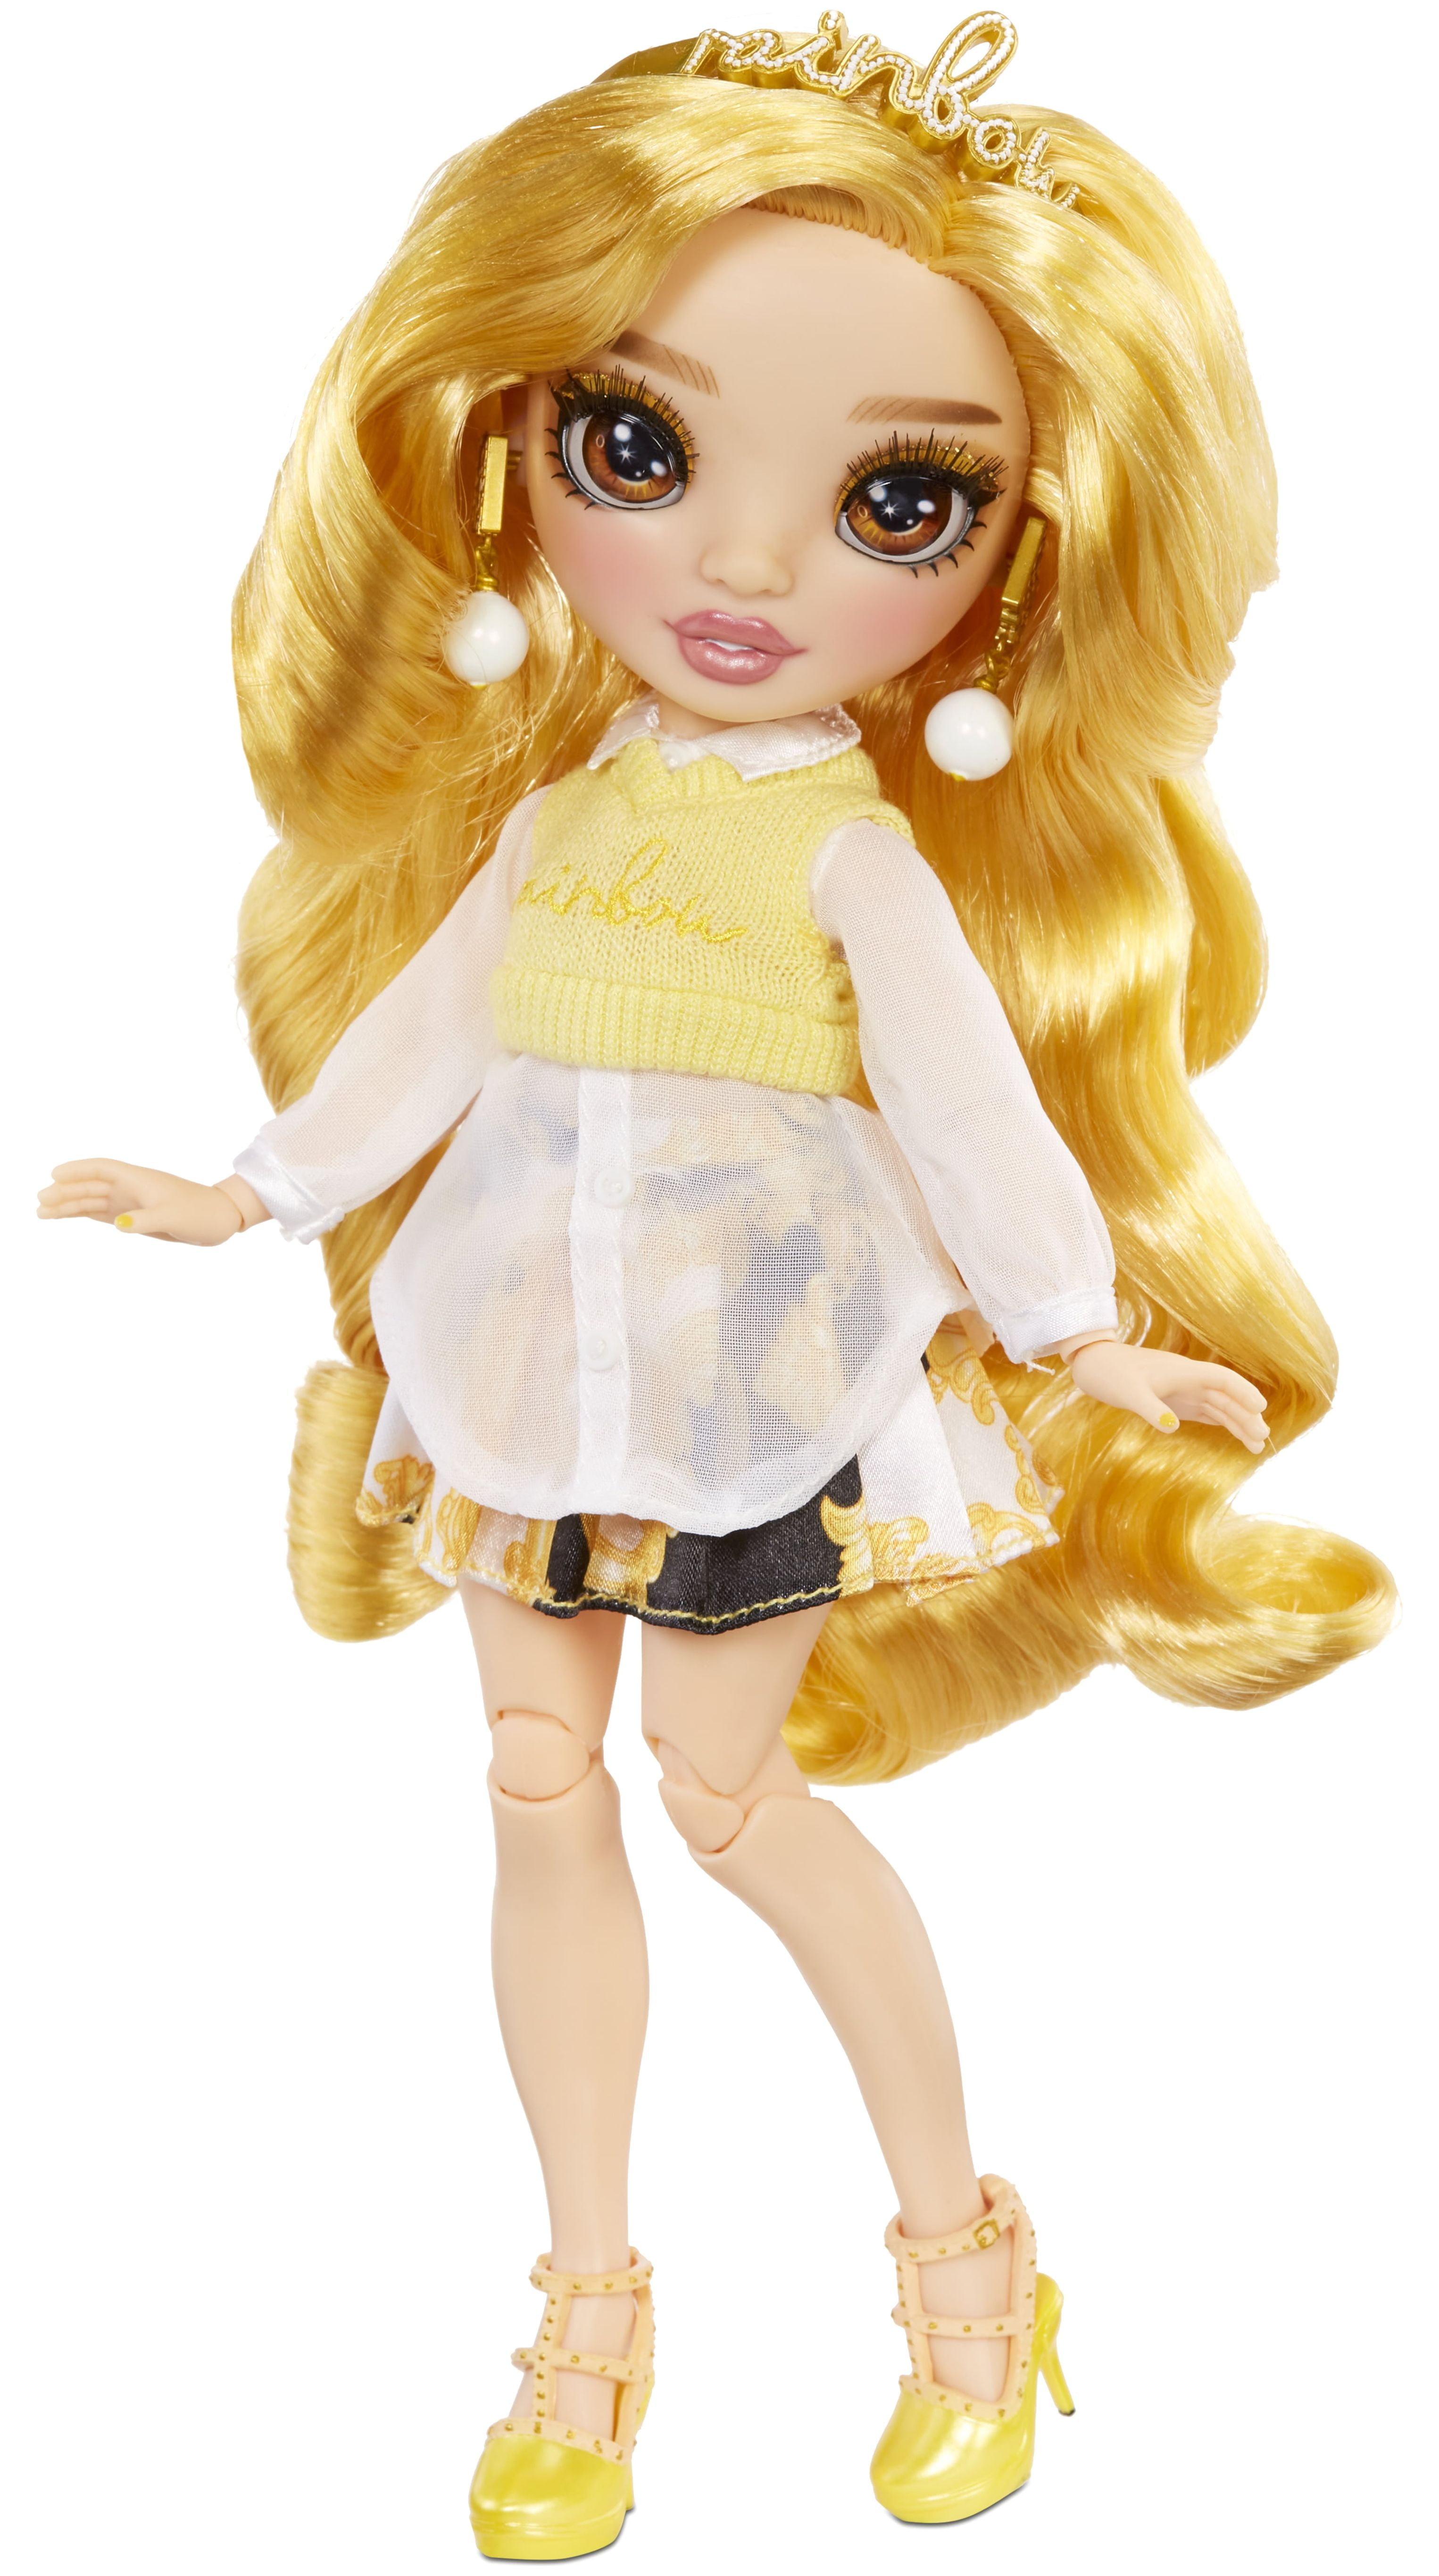  Rainbow High Series 3 Sheryl Meyer Fashion Doll – Marigold  (Yellow) with 2 Designer Outfits to Mix & Match with Accessories, Gift for  Kids and Collectors, Toys for Kids Ages 6